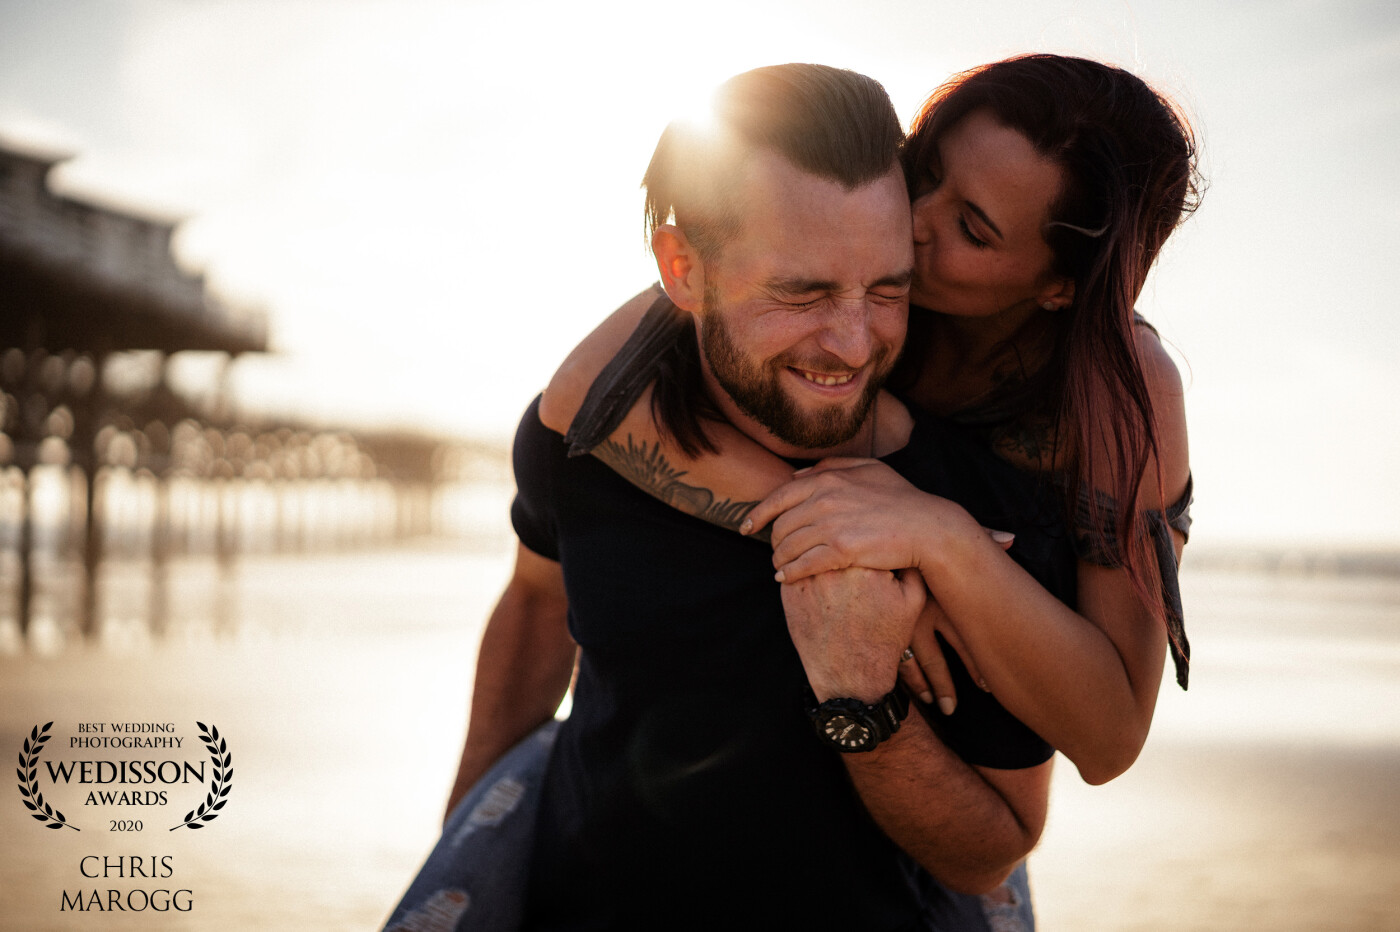 During our language stay in San Diego we met Kat & Jacob and did a couple shoot with them at the pier in Pacific Beach. <br />
For us Swiss, the ocean and the beautiful sunsets were simply a highlight.